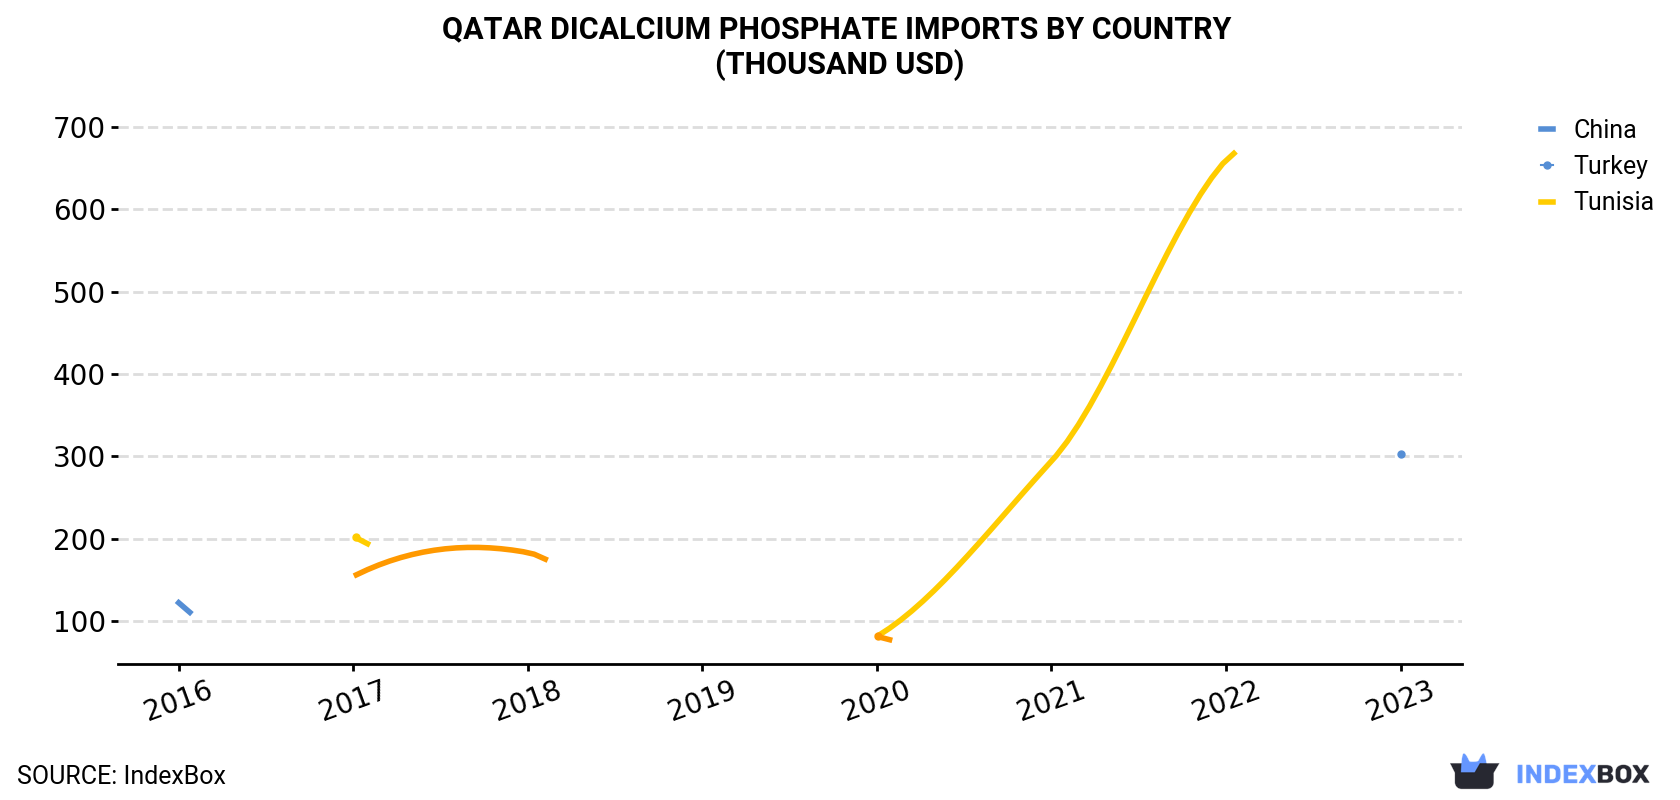 Qatar Dicalcium Phosphate Imports By Country (Thousand USD)